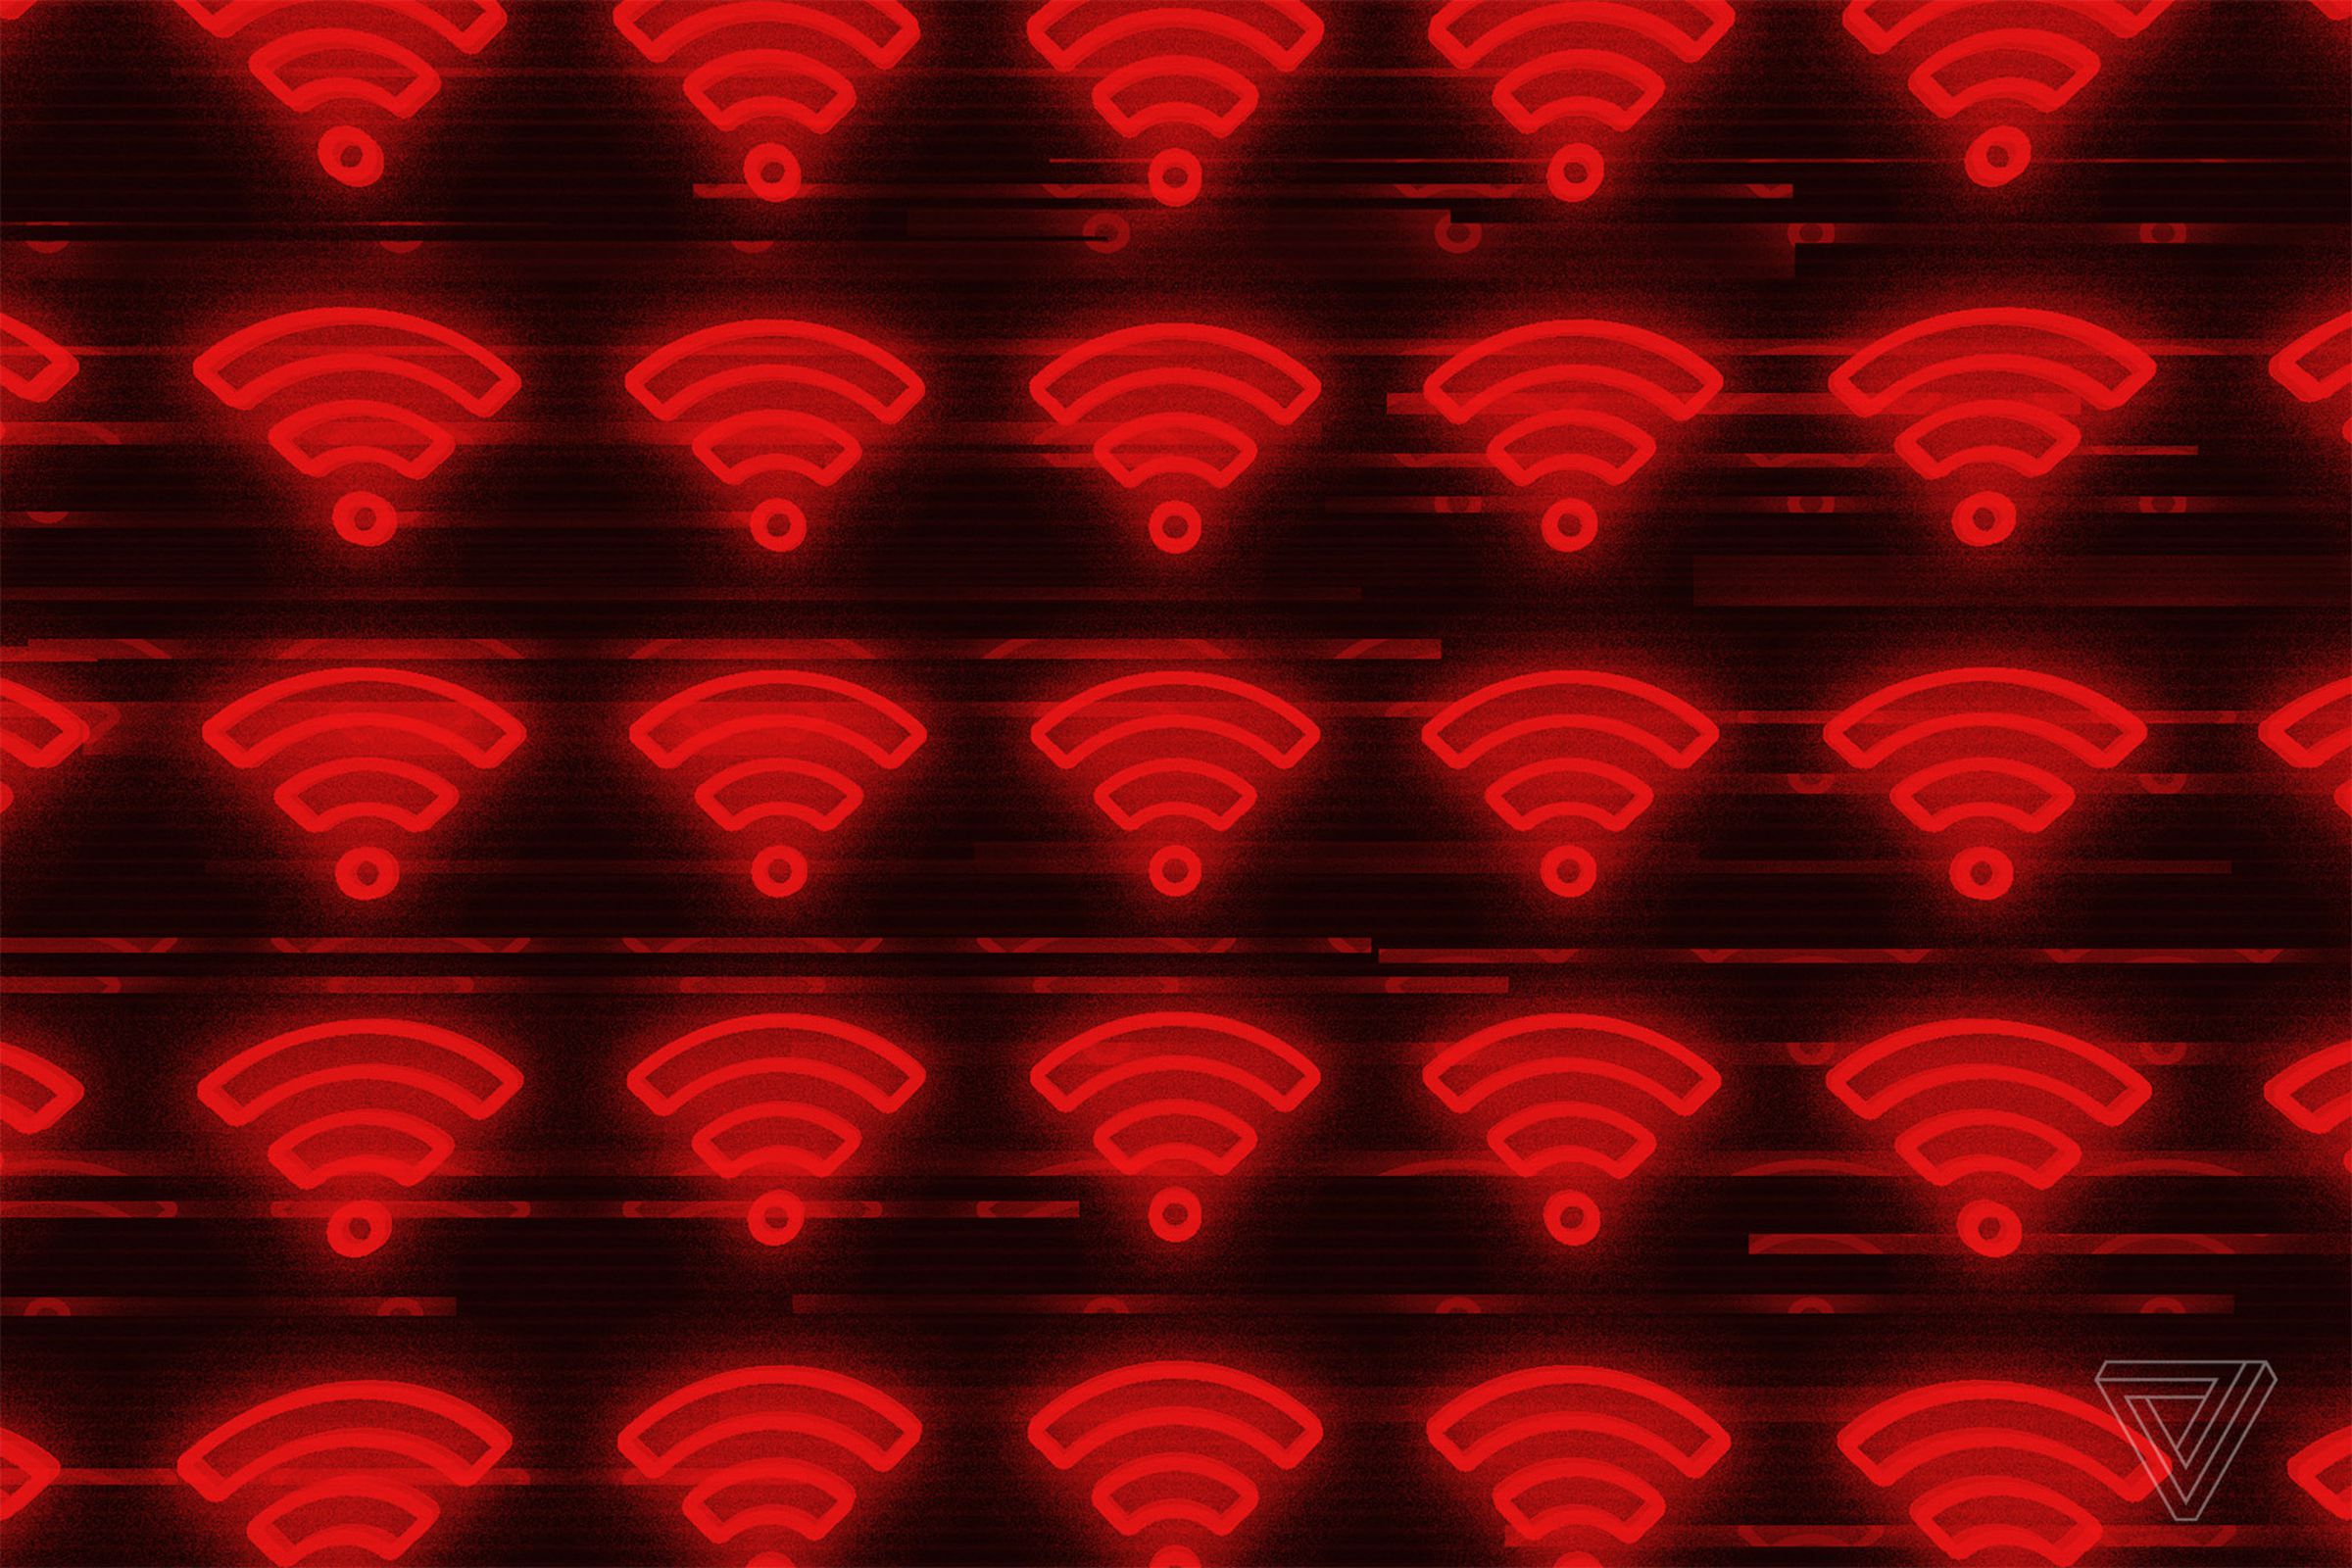 An image showing a pattern of red Wifi symbols on a black background